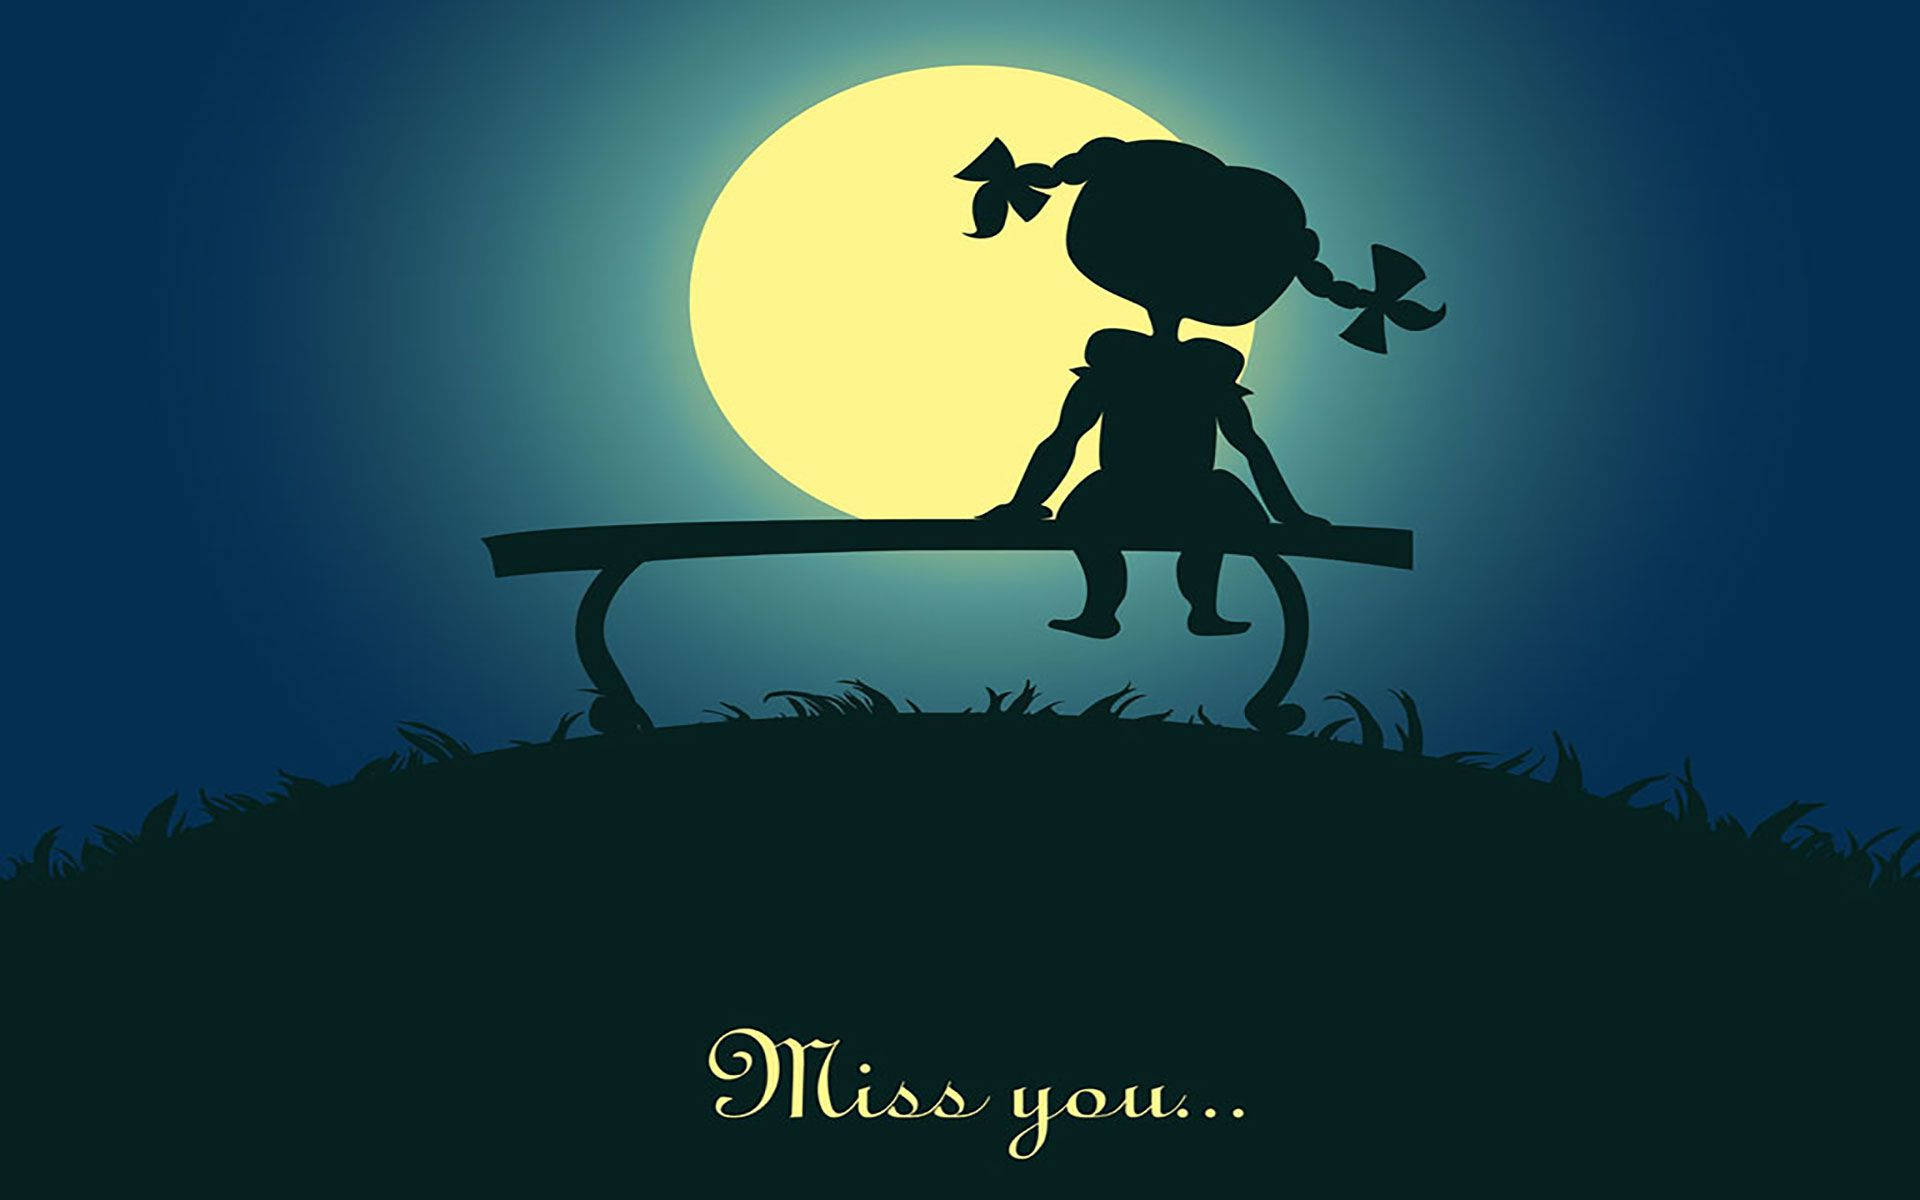 Missing You Cartoon Silhouette Background